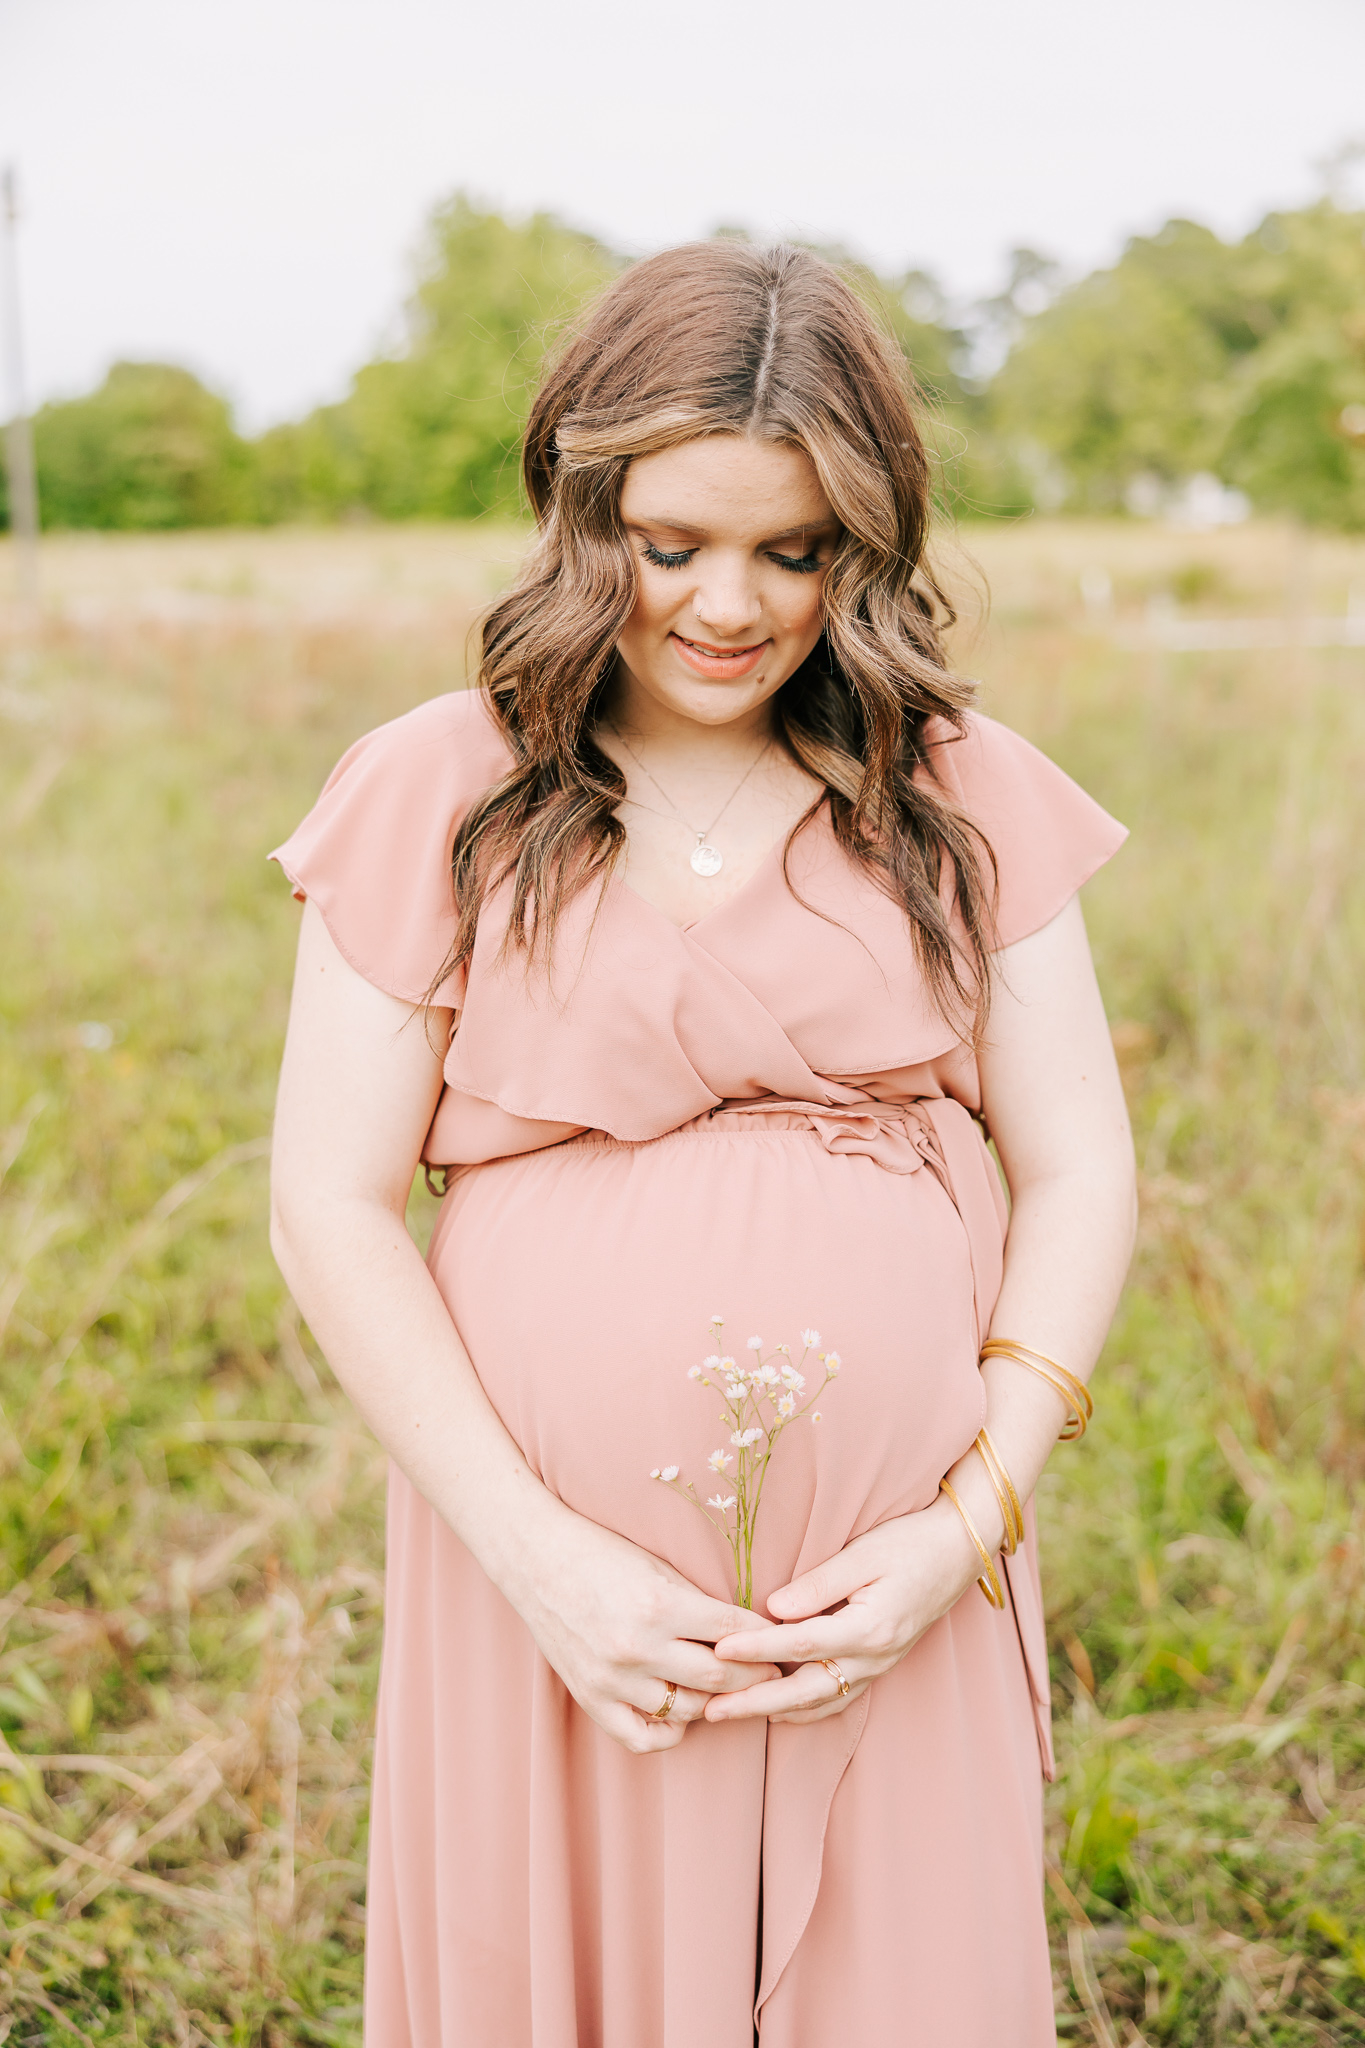 Expecting mom holding flowers during her columbia sc maternity session with molly berry. mom is using a baby shower venue in columbia sc.